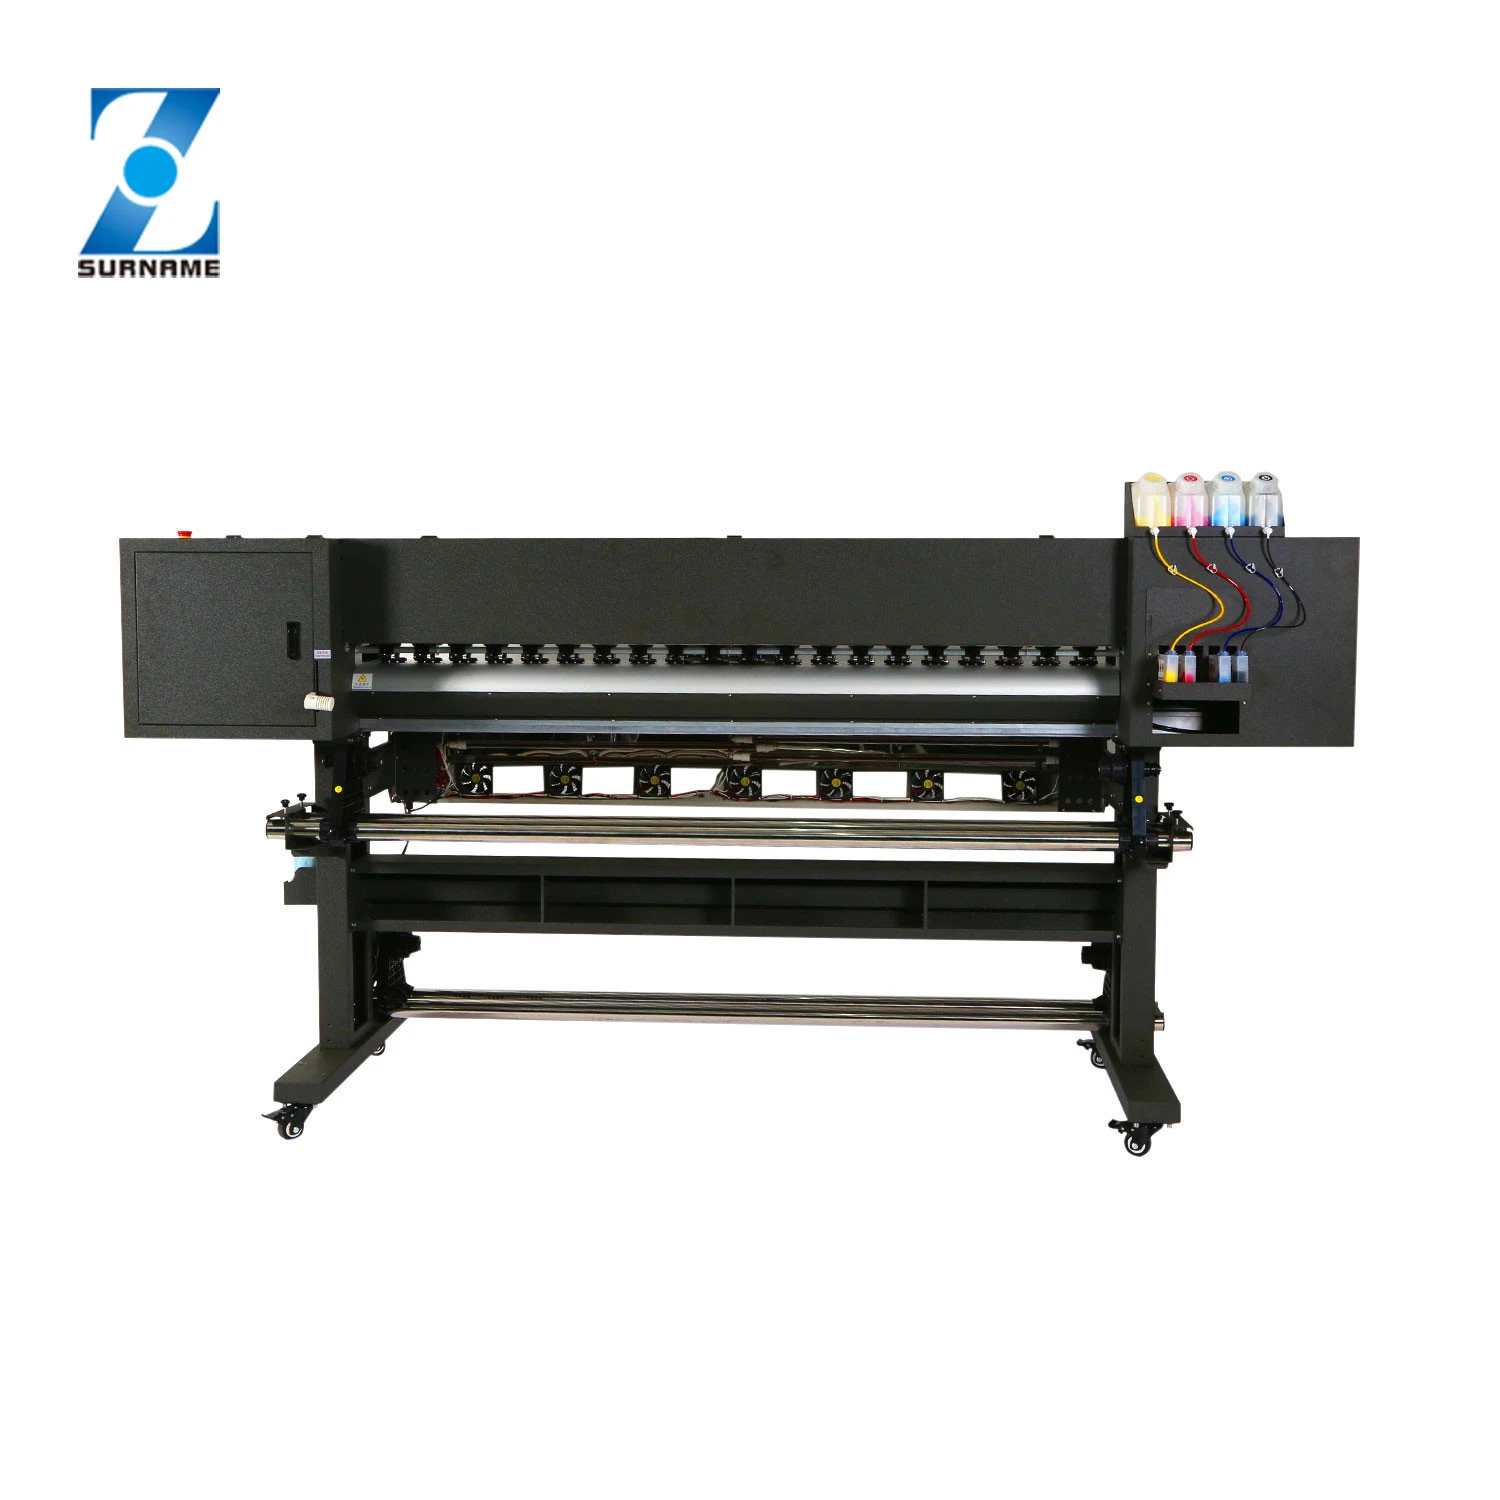 New design 1.8m double DX5 DX7 4720 Printheads 1440dpi Eco Solvent Outdoor Advertising Large Format graph plotter Inkjet Printer